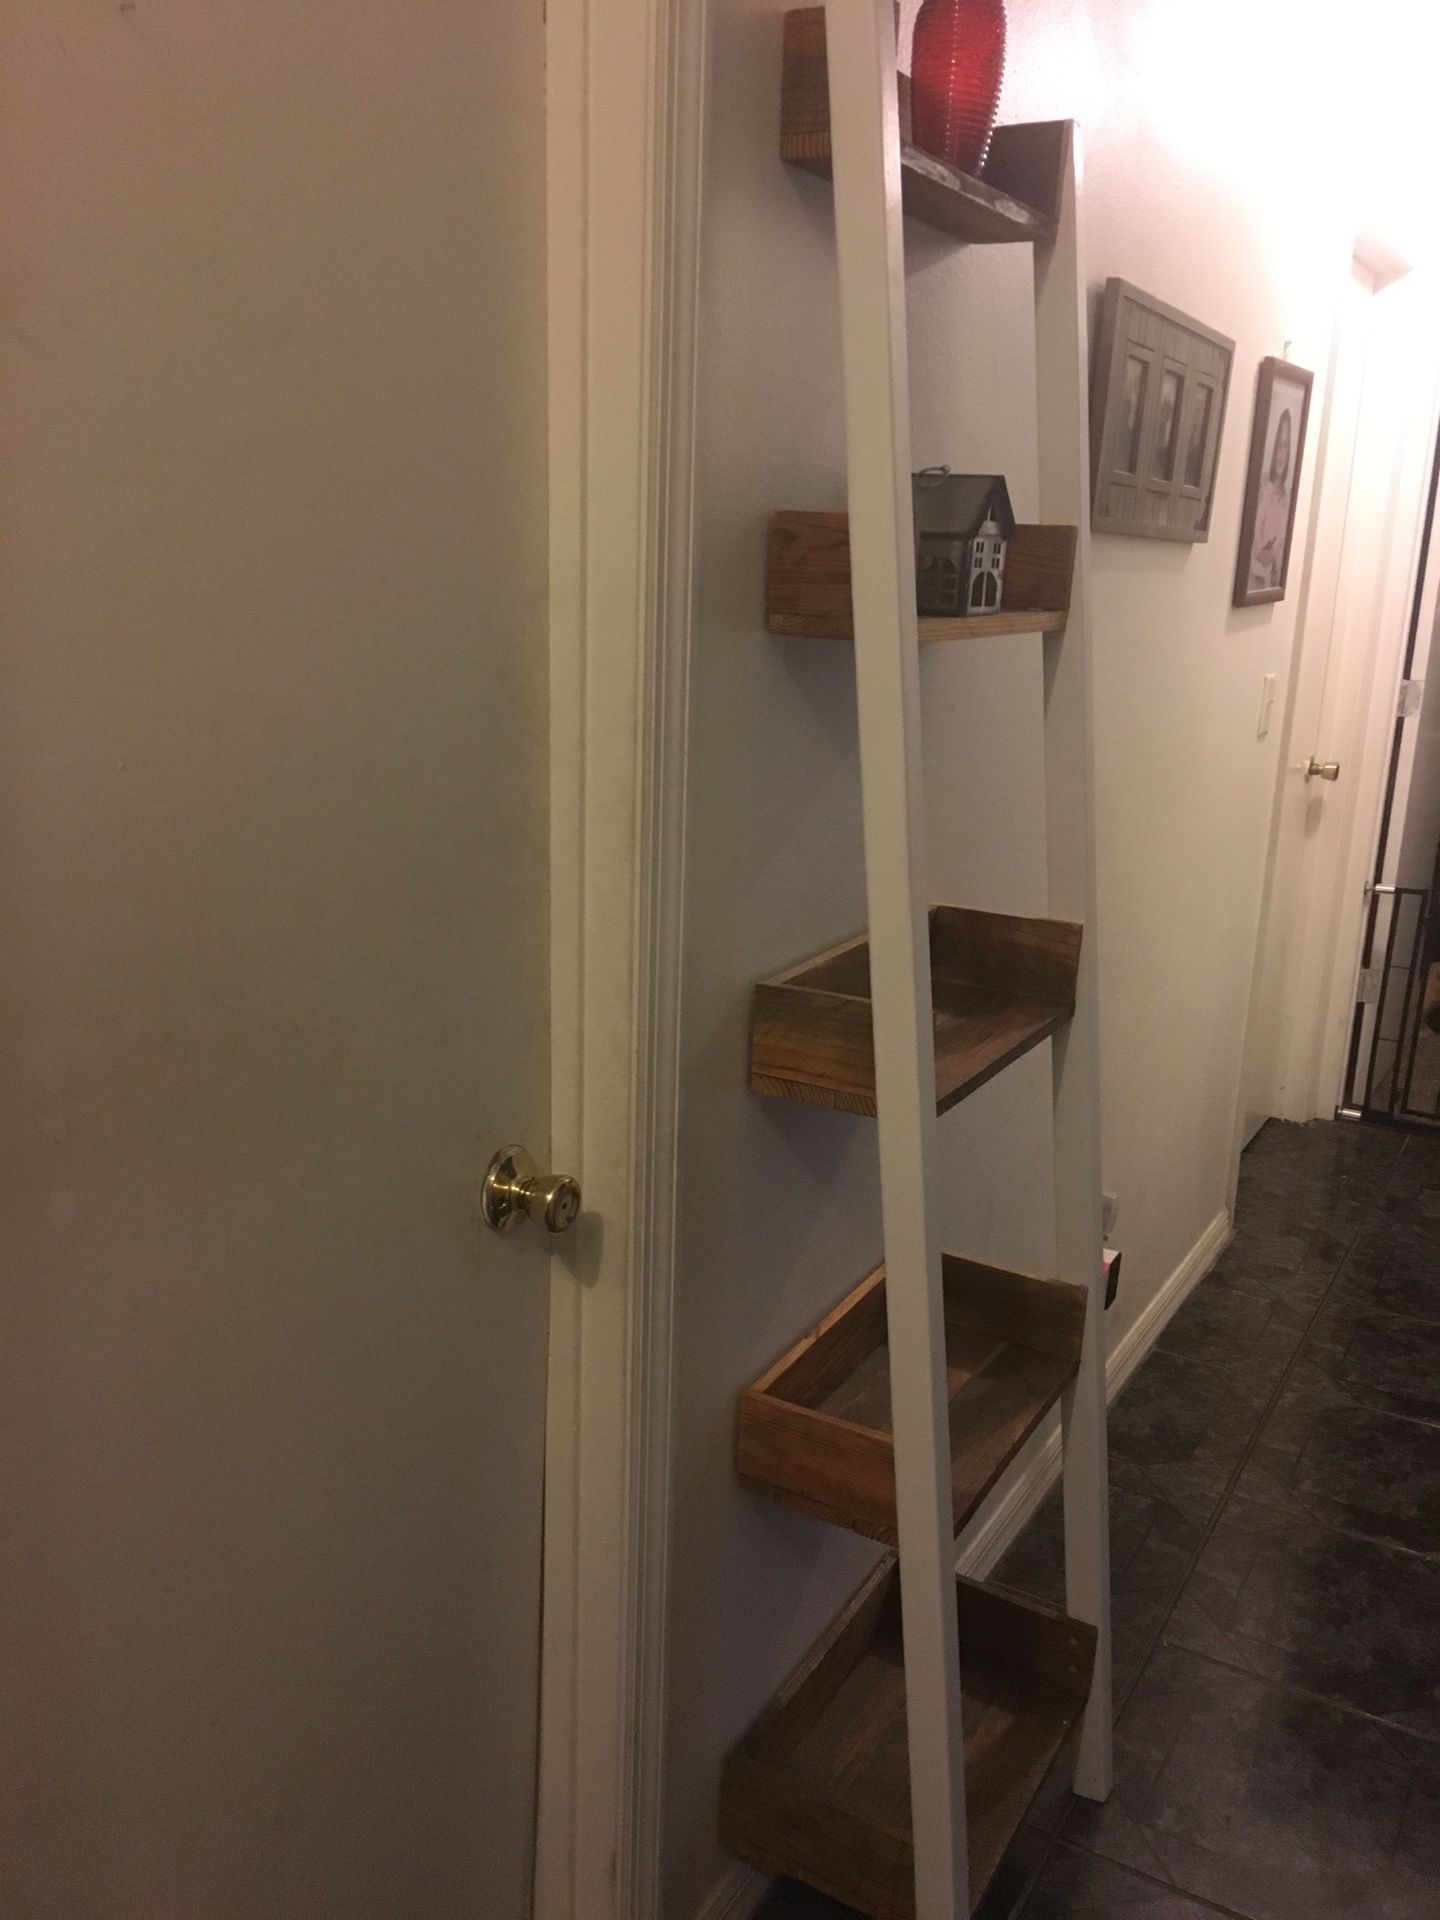 Country style furniture ladder shelf rack (newly built)